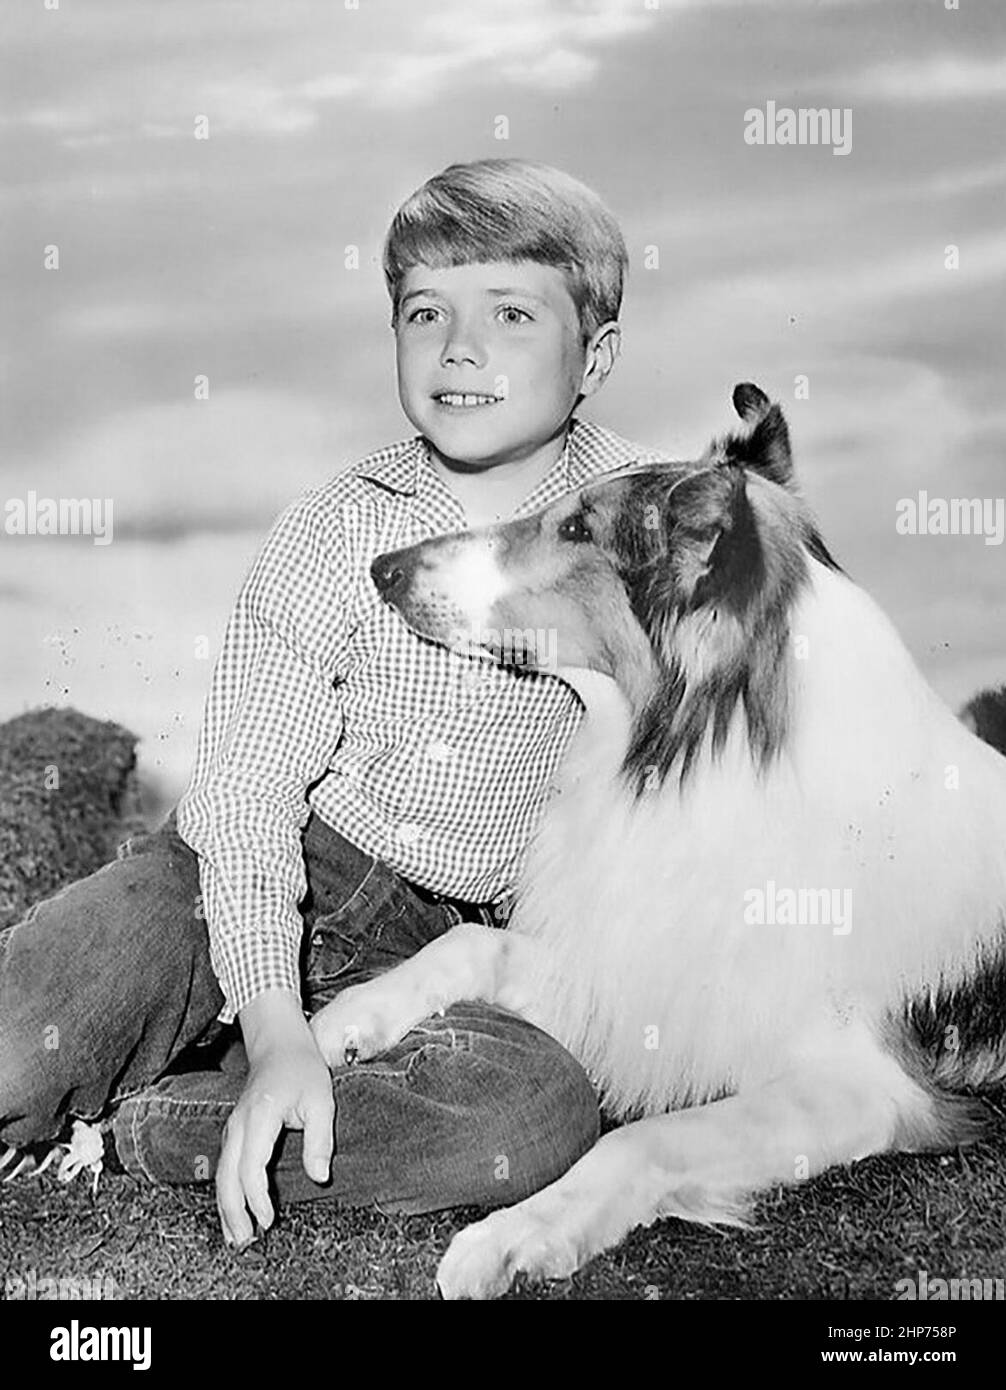 Publicity photo of Jon Provost and Lassie from the television program Lassie. Press release is dated 14 September 1962. Stock Photo